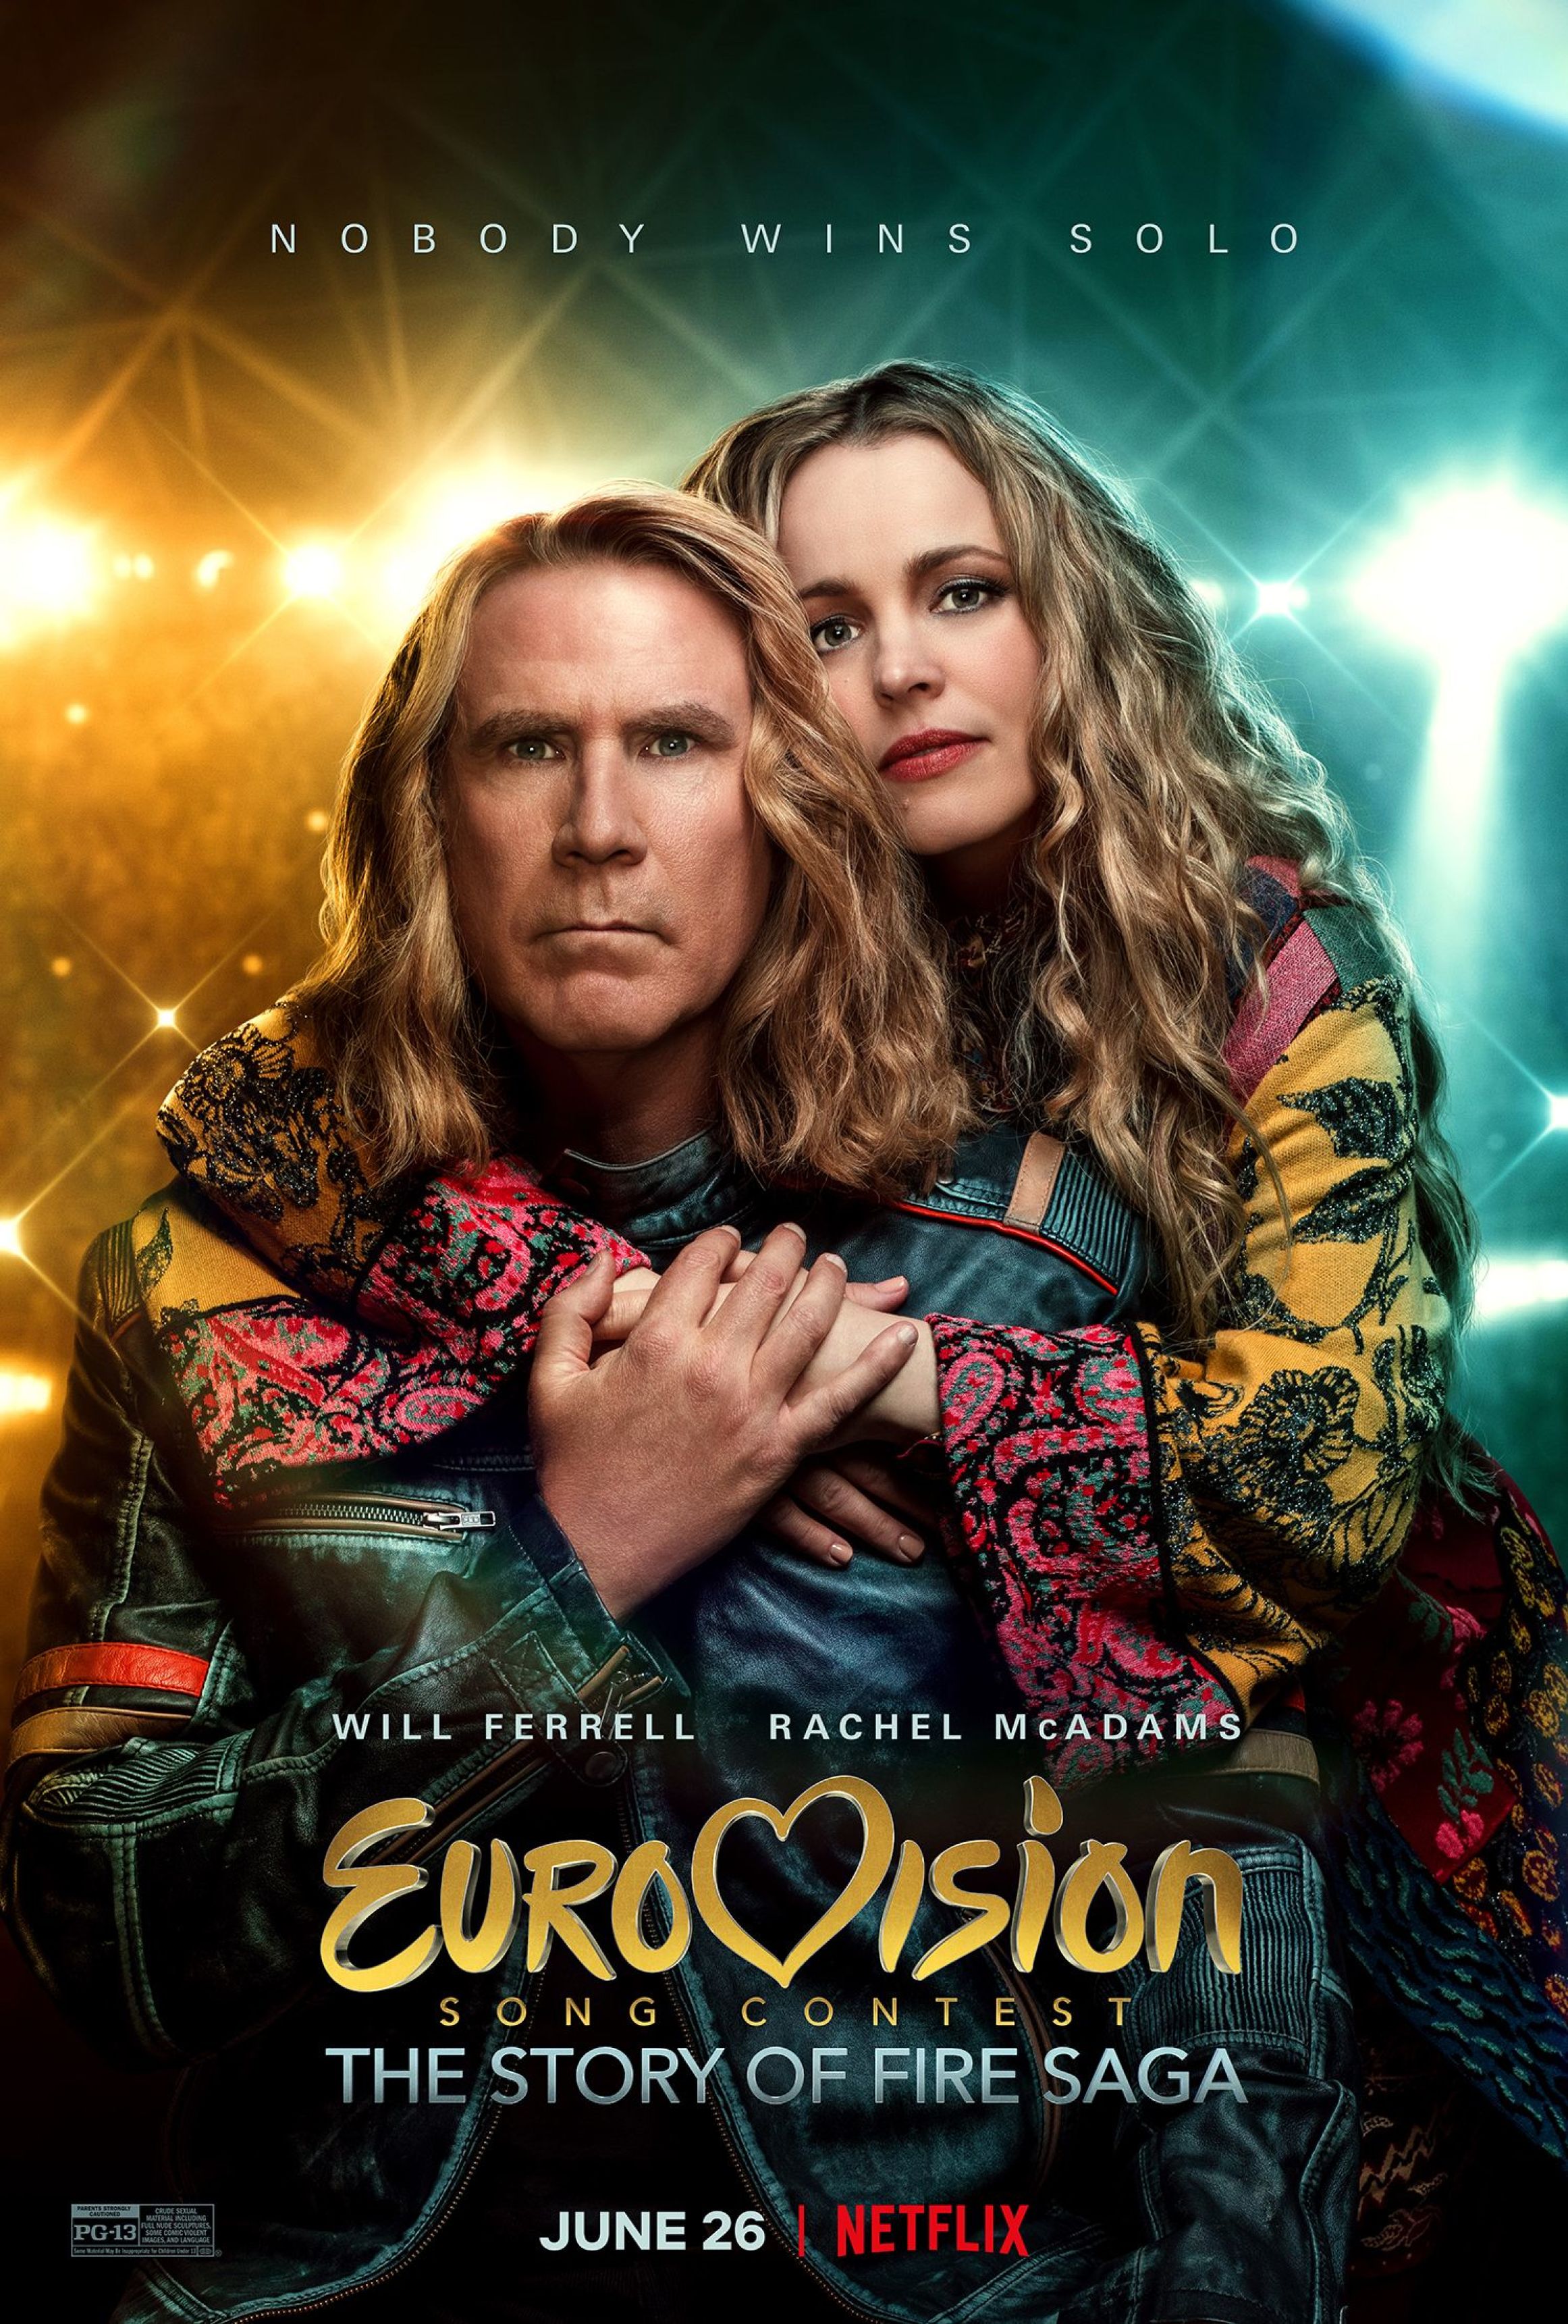 <p>Will Ferrell and Rachel McAdams starred in the hilarious 2020 musical comedy "Eurovision Song Contest: The Story of Fire Saga." The Netflix movie focuses on two Icelandic singers, Lars Erickssong and Sigrit Ericksdóttir, who are given the opportunity to represent Iceland at the Eurovision Song Contest following a tragedy. While Will's comedic prowess shines in the film, Brian Tallerico of RogerEbert.com argued that Rachel was the true star: "Ferrell's skill with goofy man-children is well-documented but this comedy should remind people of the underrated range of Rachel McAdams, who once again just nails a comedy role." </p>